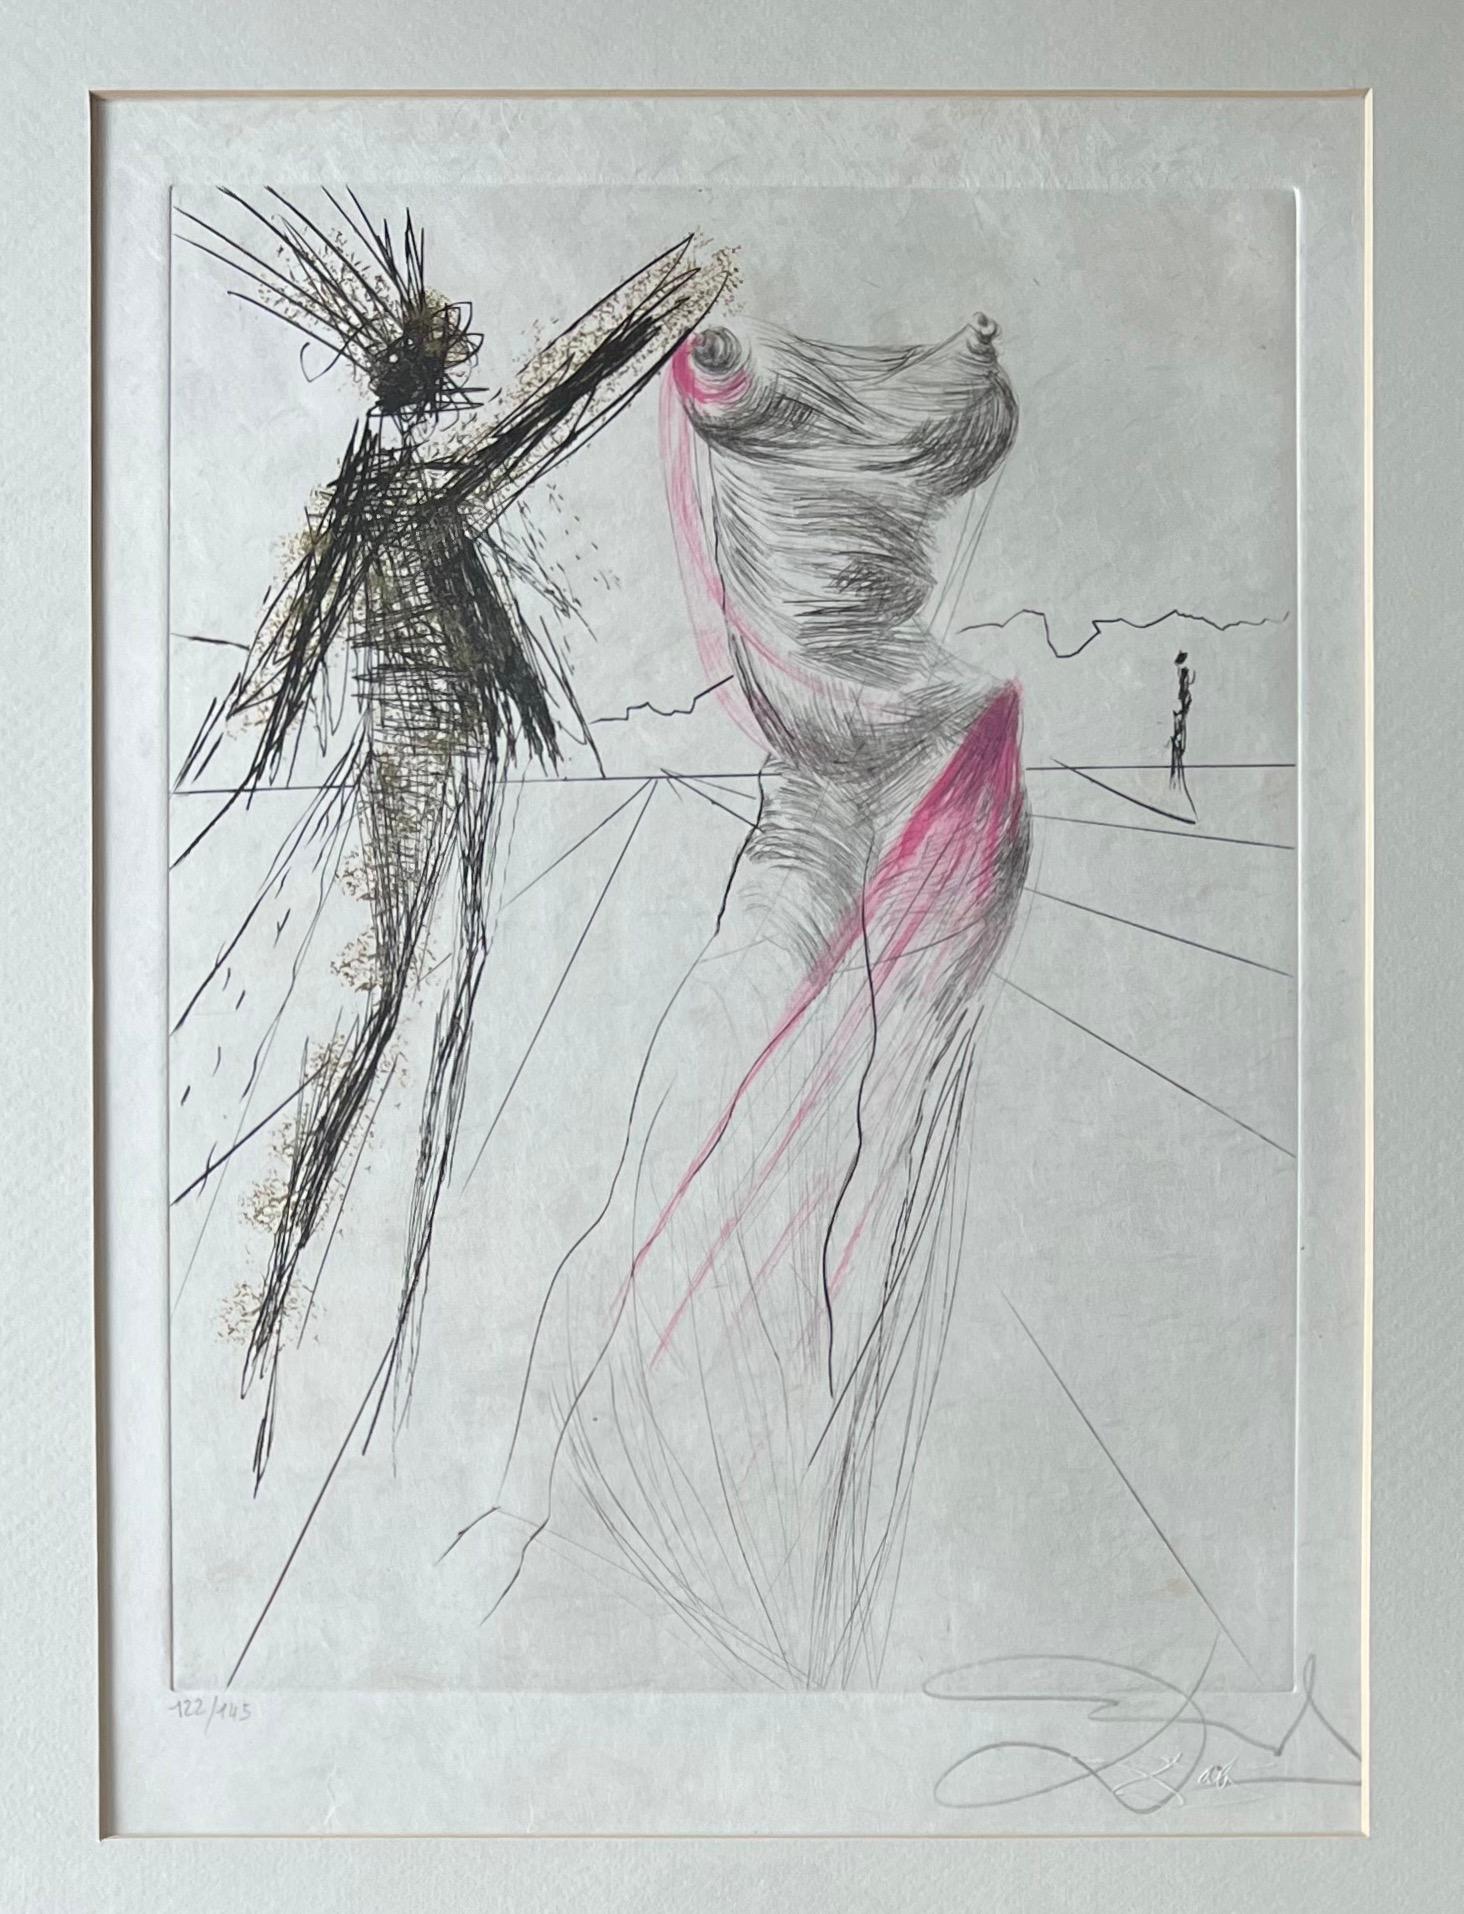 hand watercolored drypoint etching on extremely fine Japanese paper, edited in 1968
limited edition, numbered in lower left corner 122/145
signed in pencil by artist in lower right corner
paper size: 38.5 x 28.5 cm
framed size: 58 x 48 cm
very good